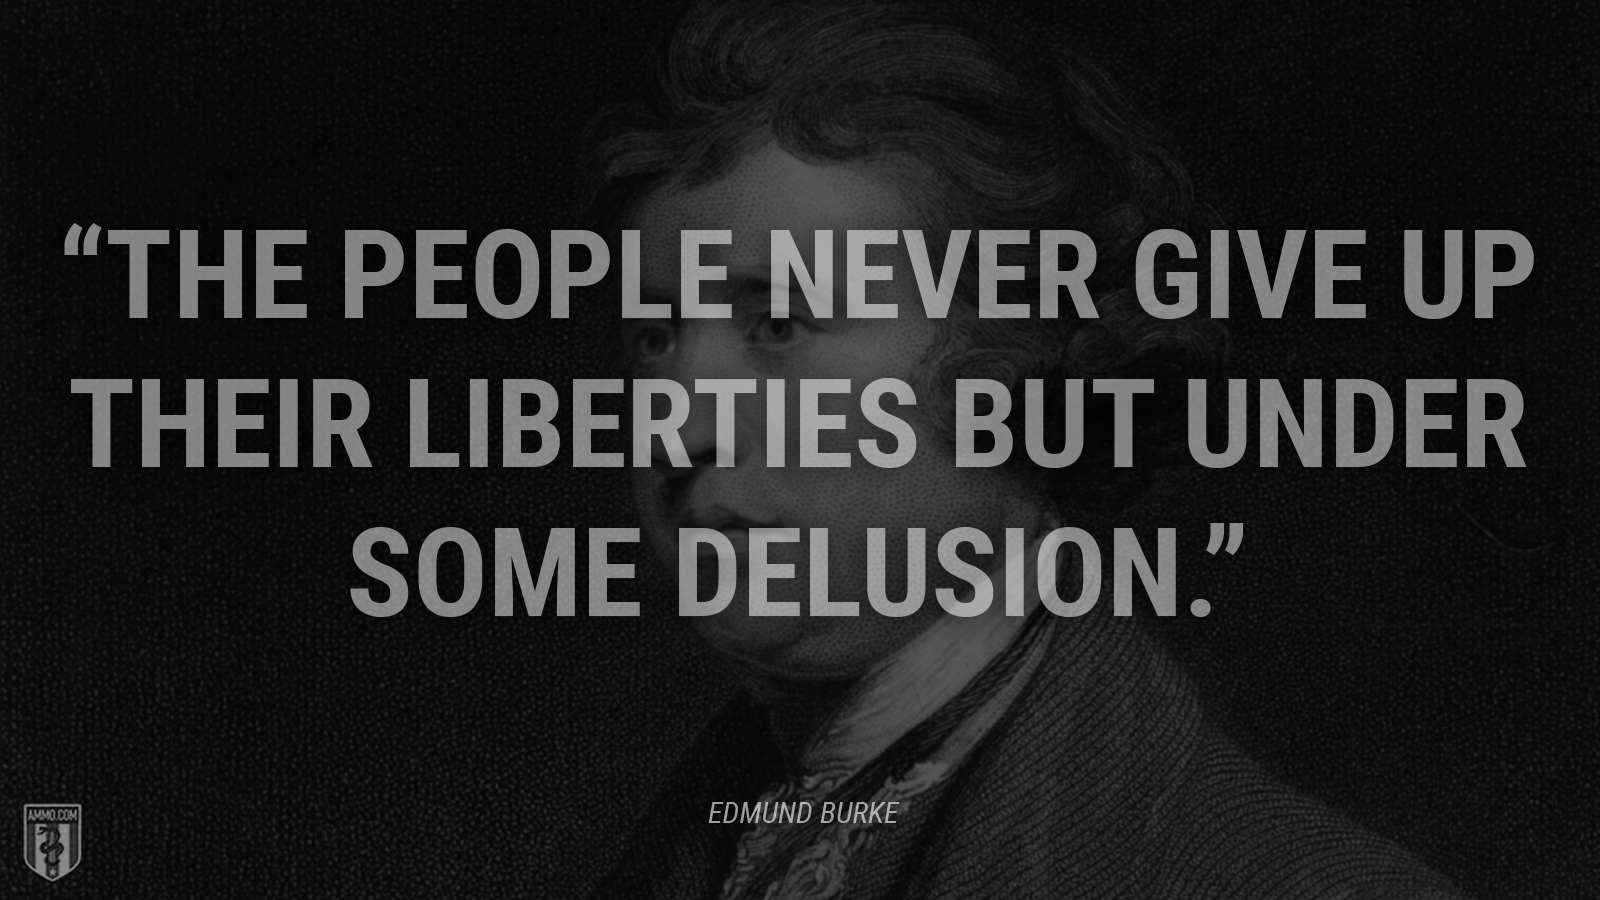 “The people never give up their liberties but under some delusion.” - Edmund Burke